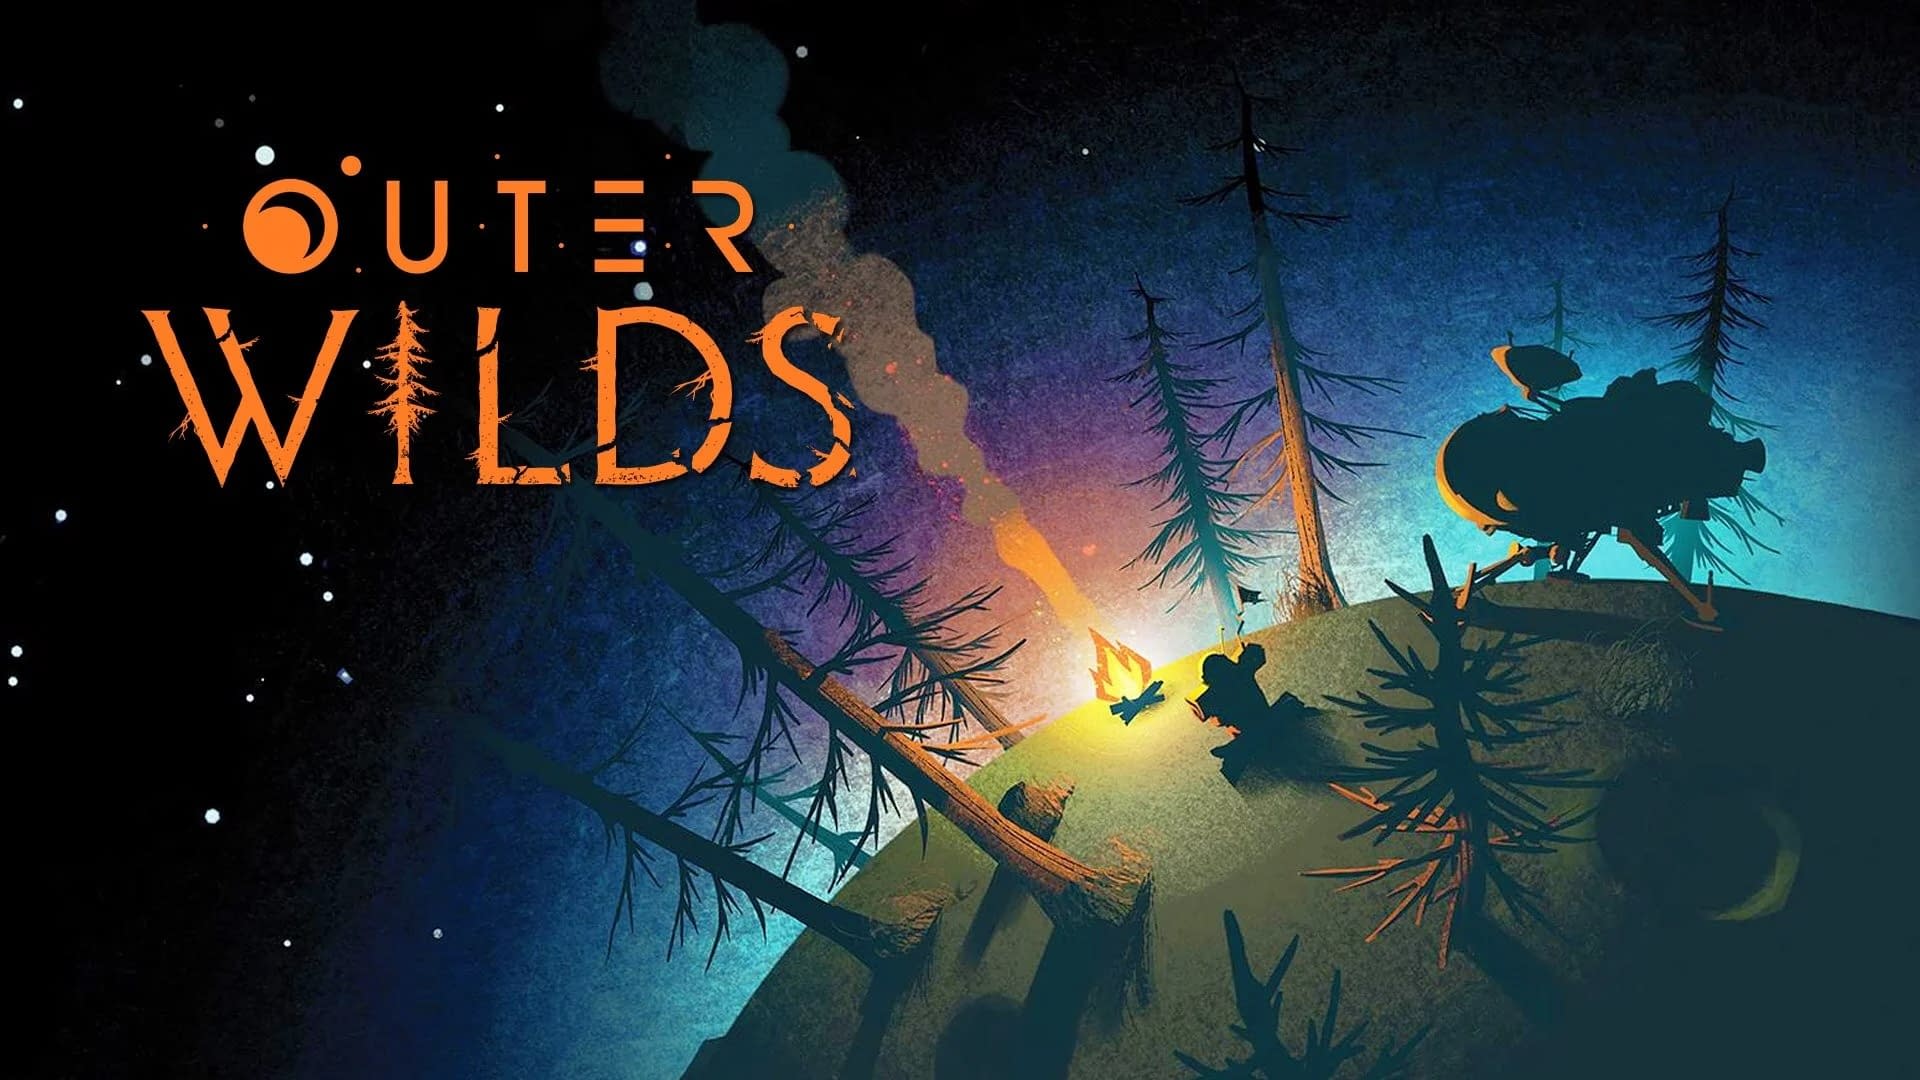 Uter Wilds: Archaeologist Edition was rated for Switch